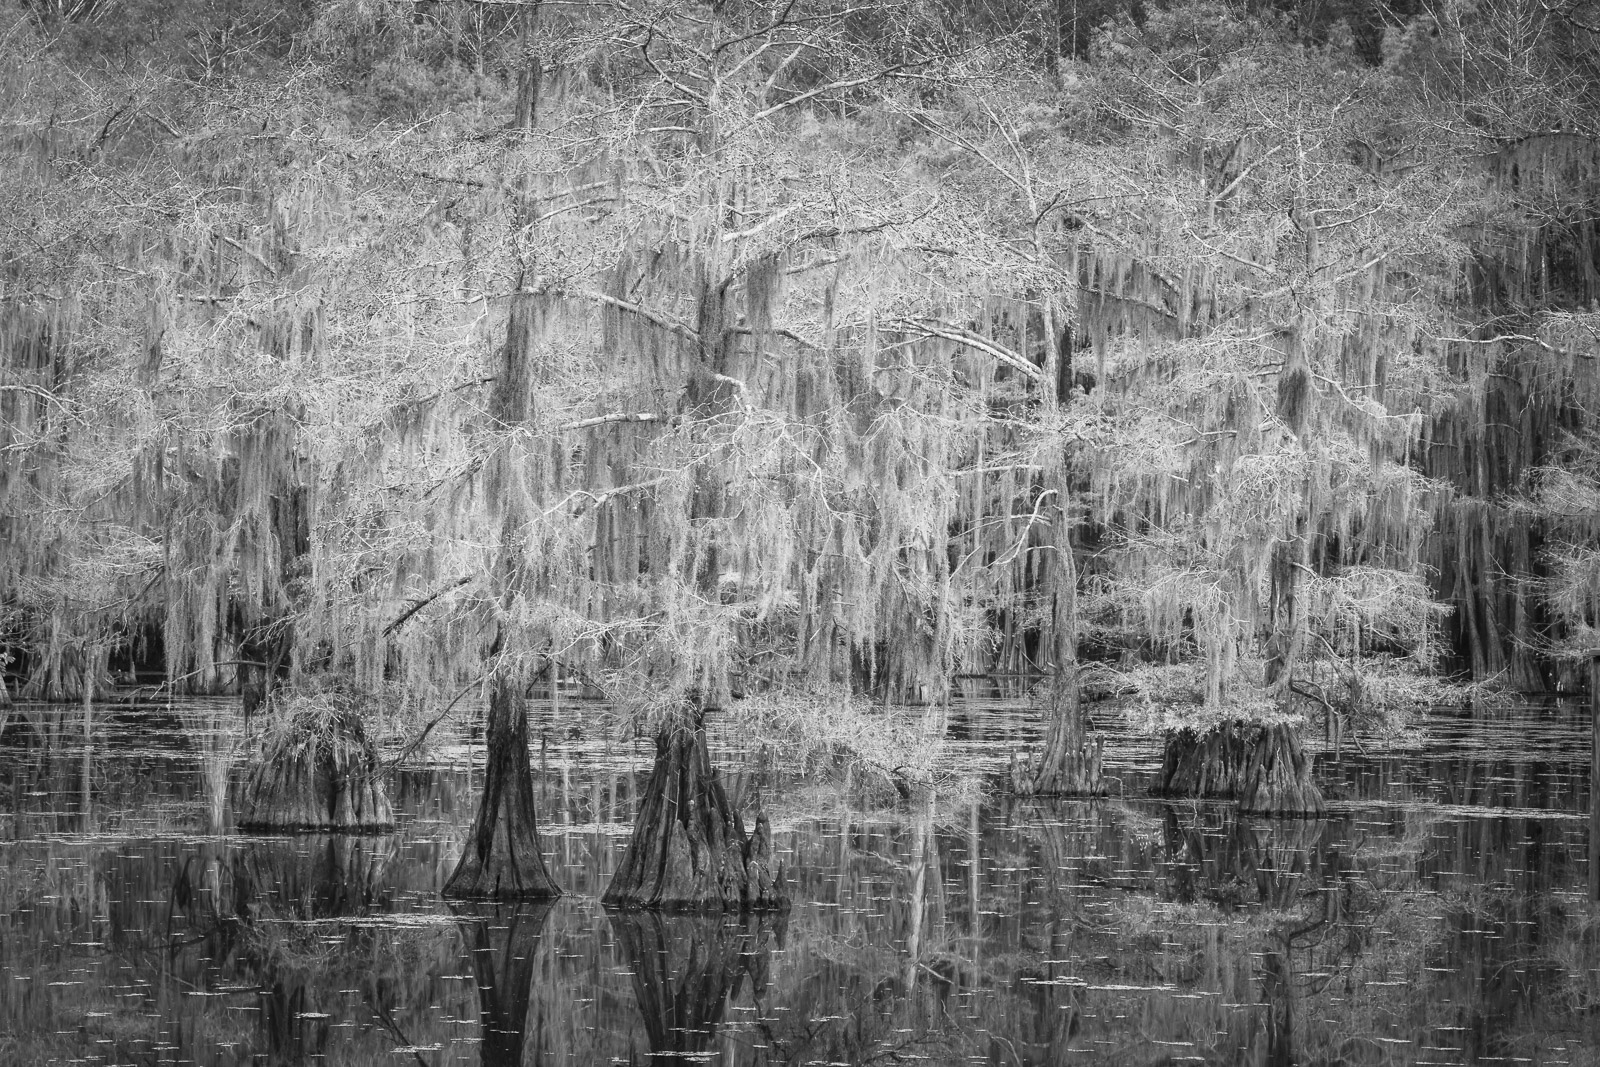 Bald Cypress tress in Caddo Lake State Park, Texas.